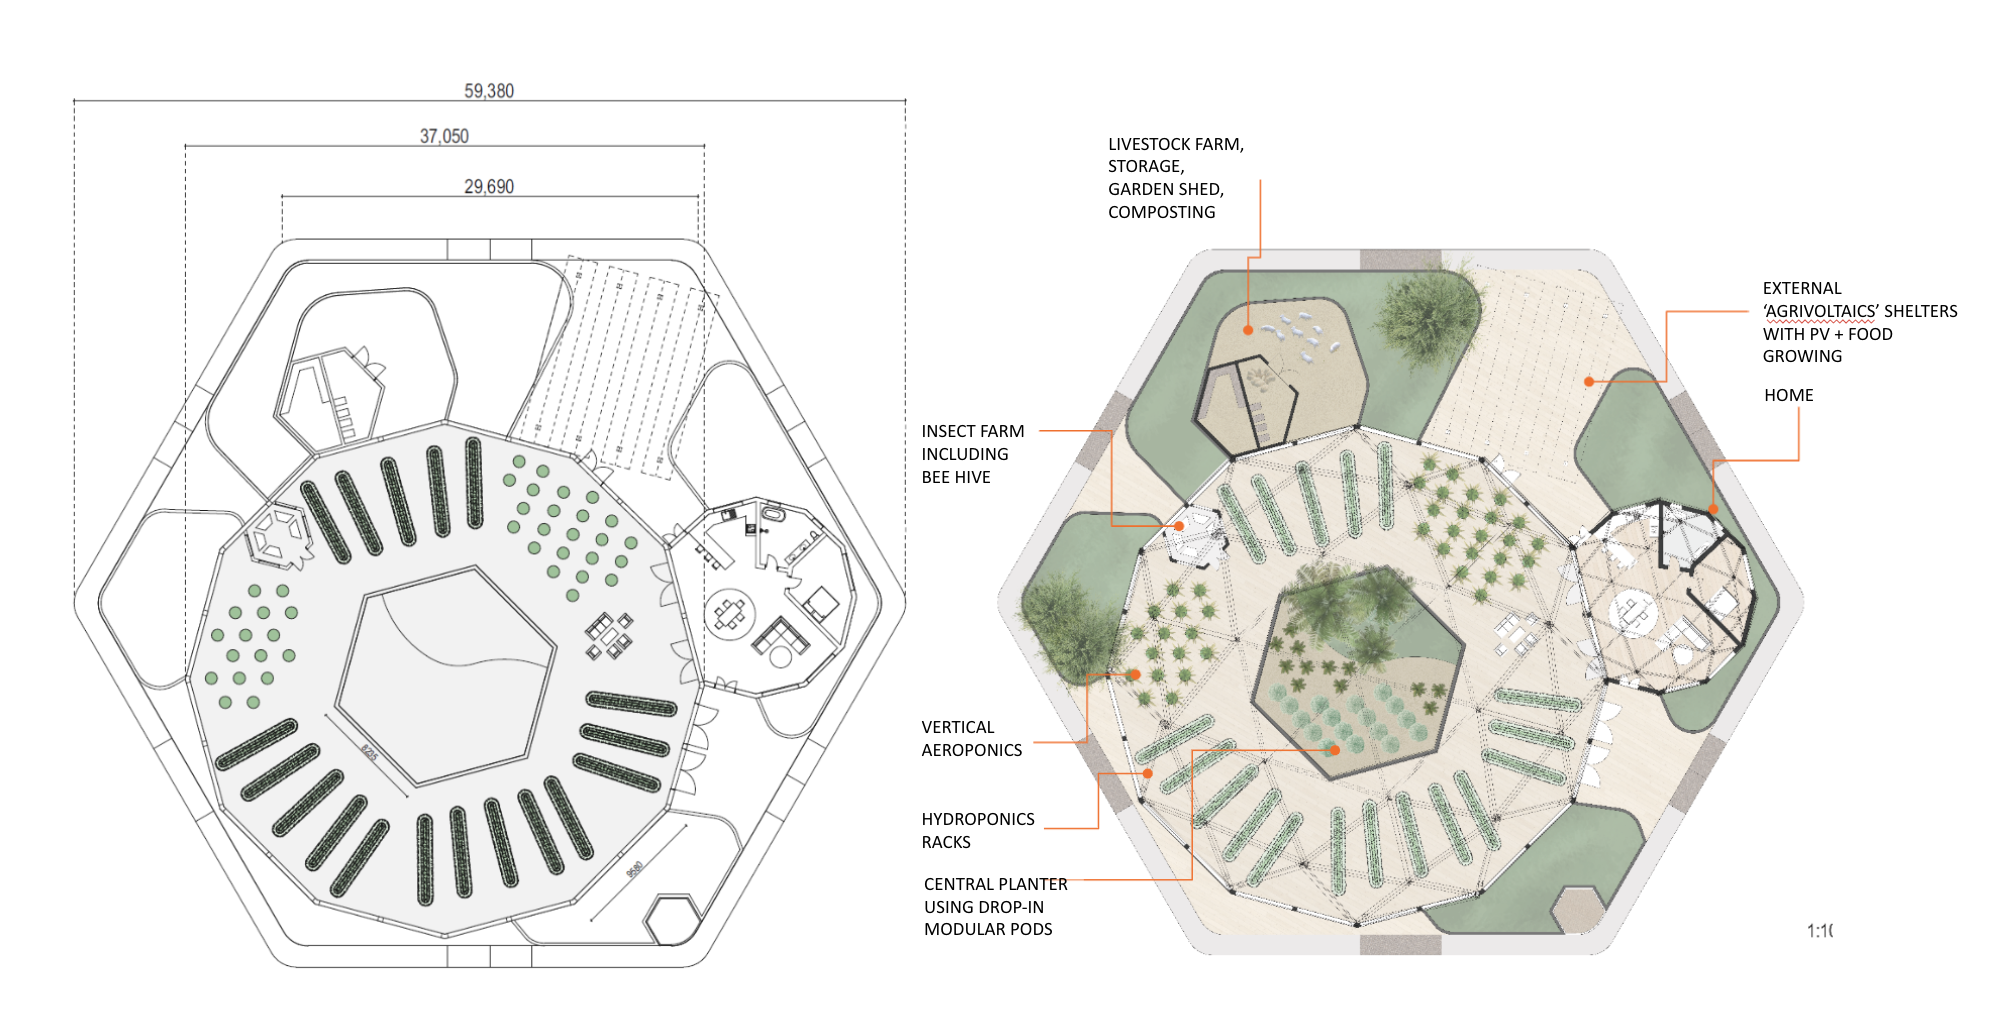 Planning behind the hexagonal farms, sourced from Digby Hall &amp; Madeleine Gallagher